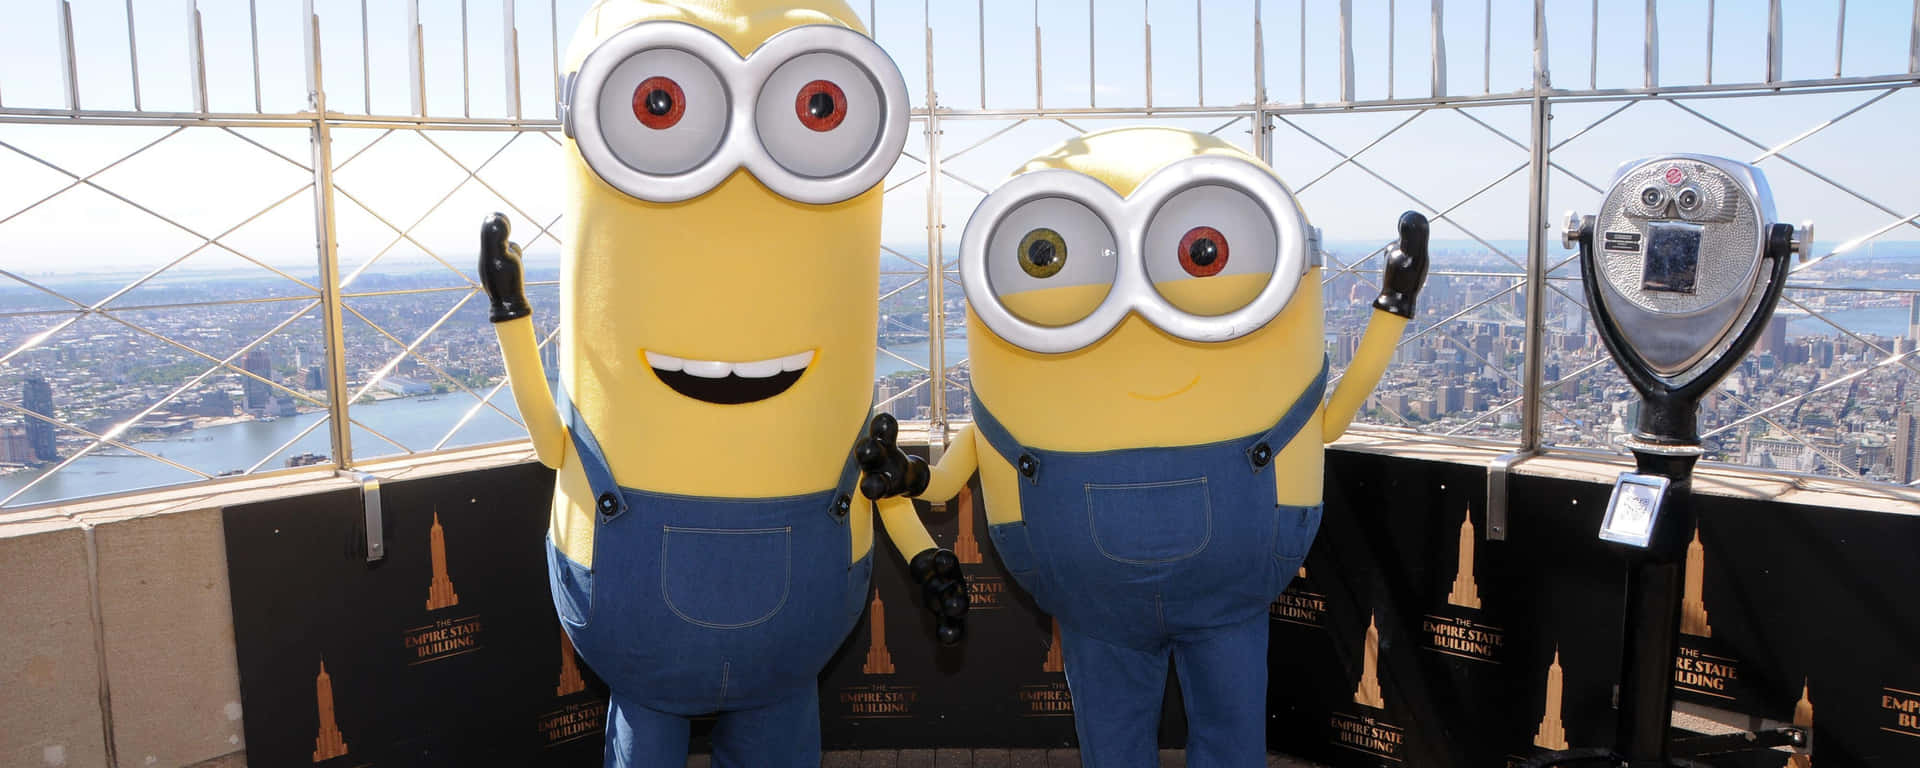 Get ready to have some fun with Minions!